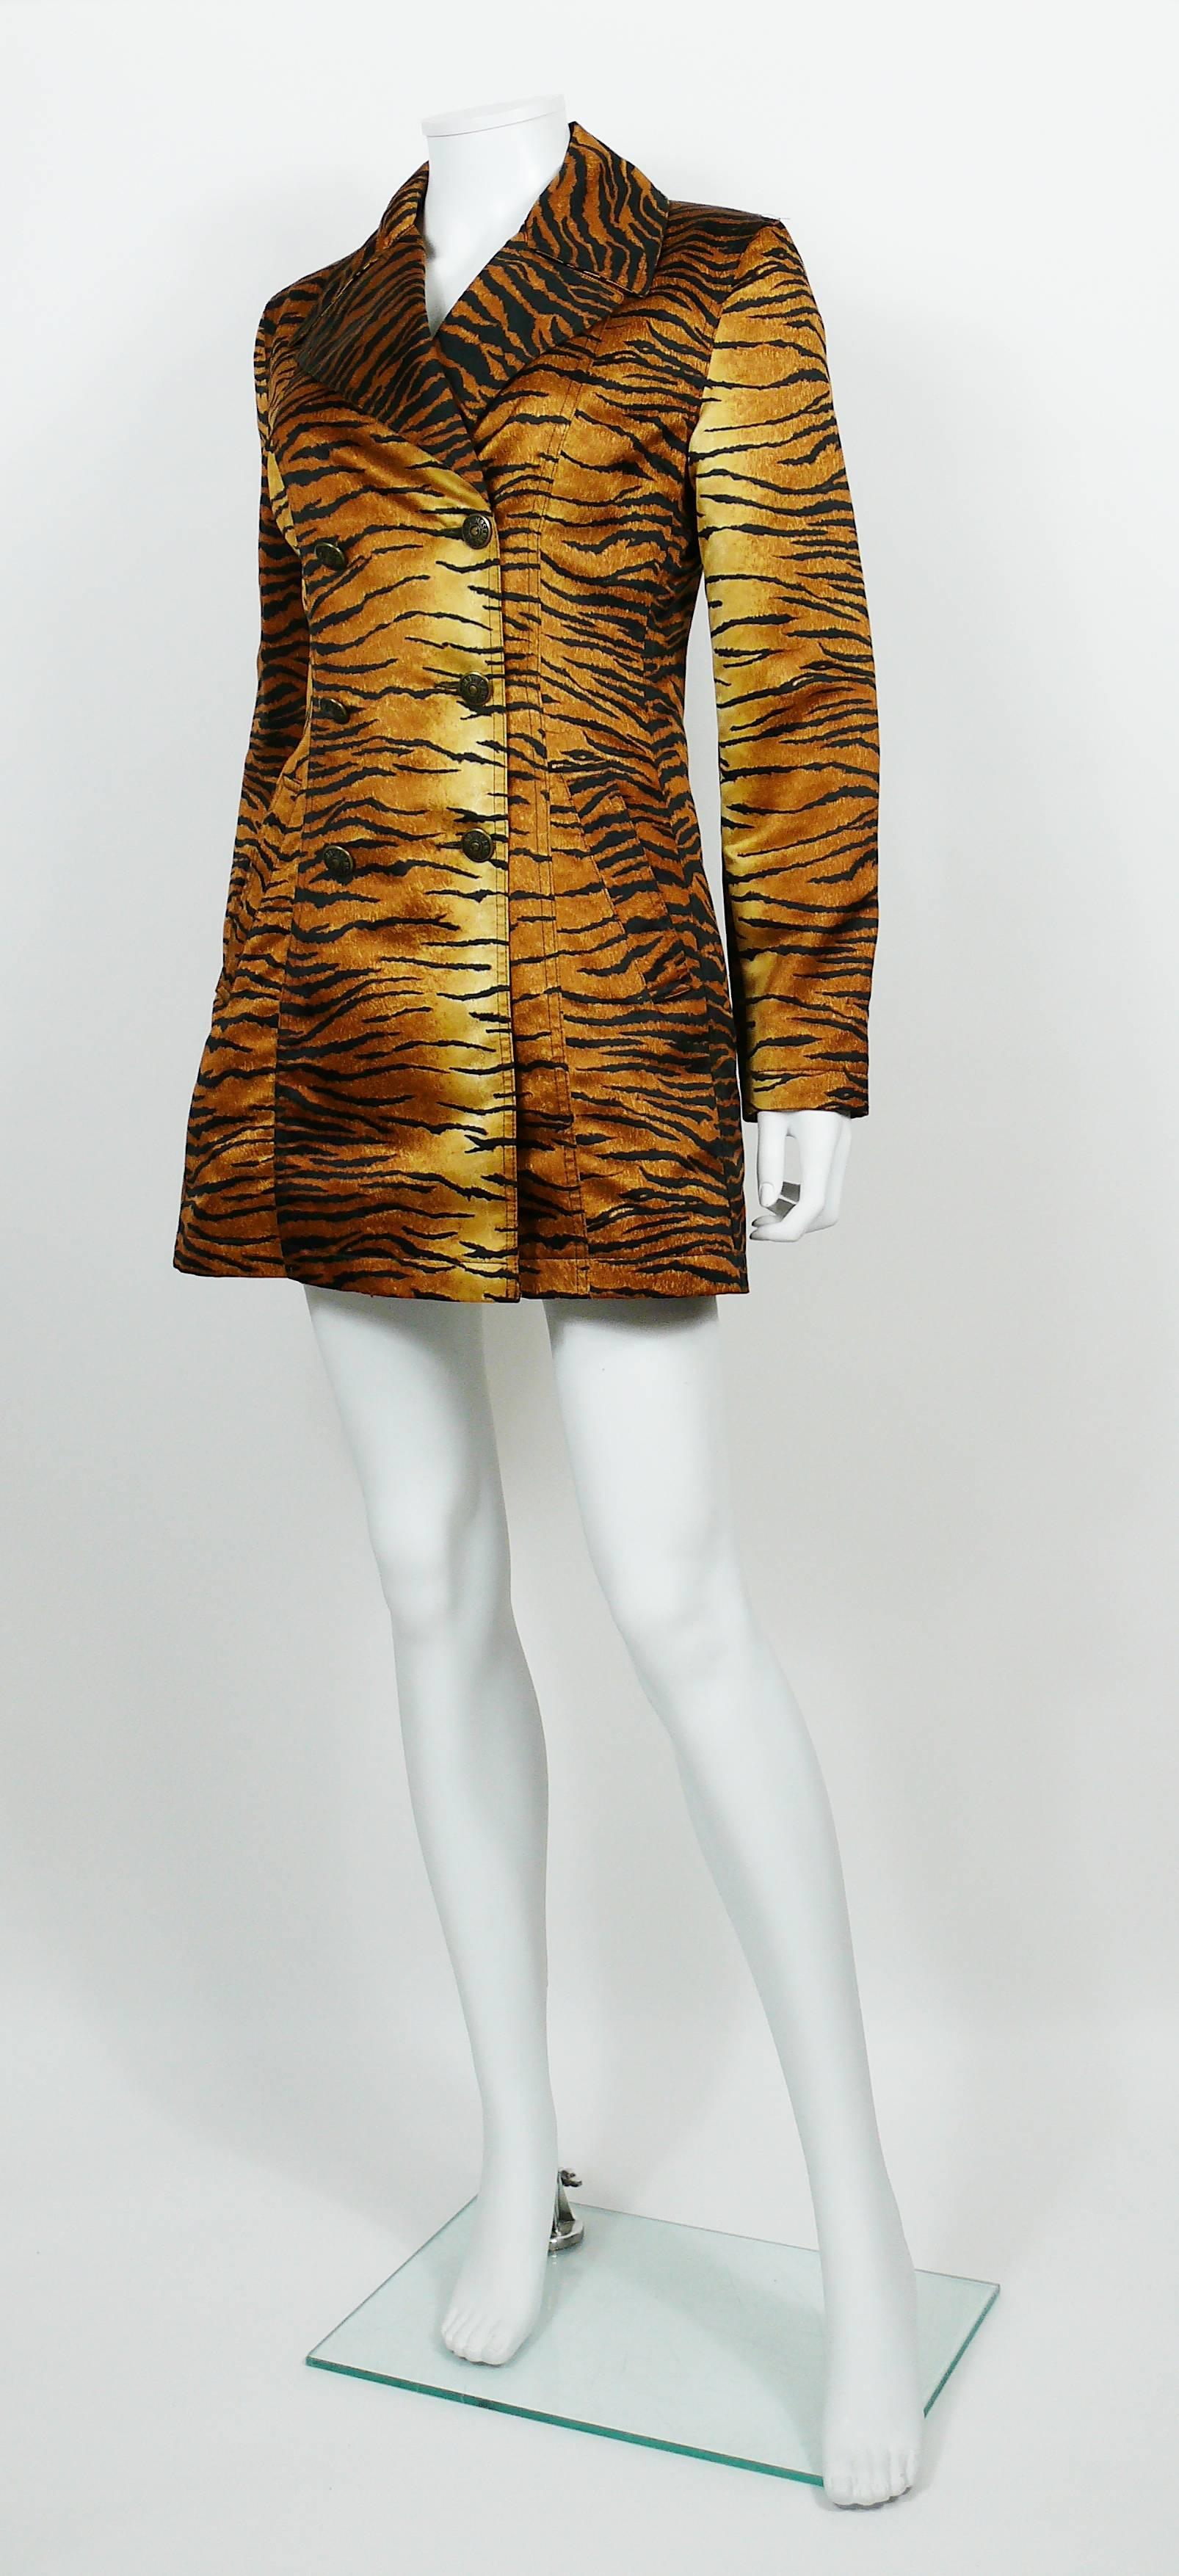 Moschino Jeans Vintage Tiger Print Double Breasted Long Jacket US Size 8 1